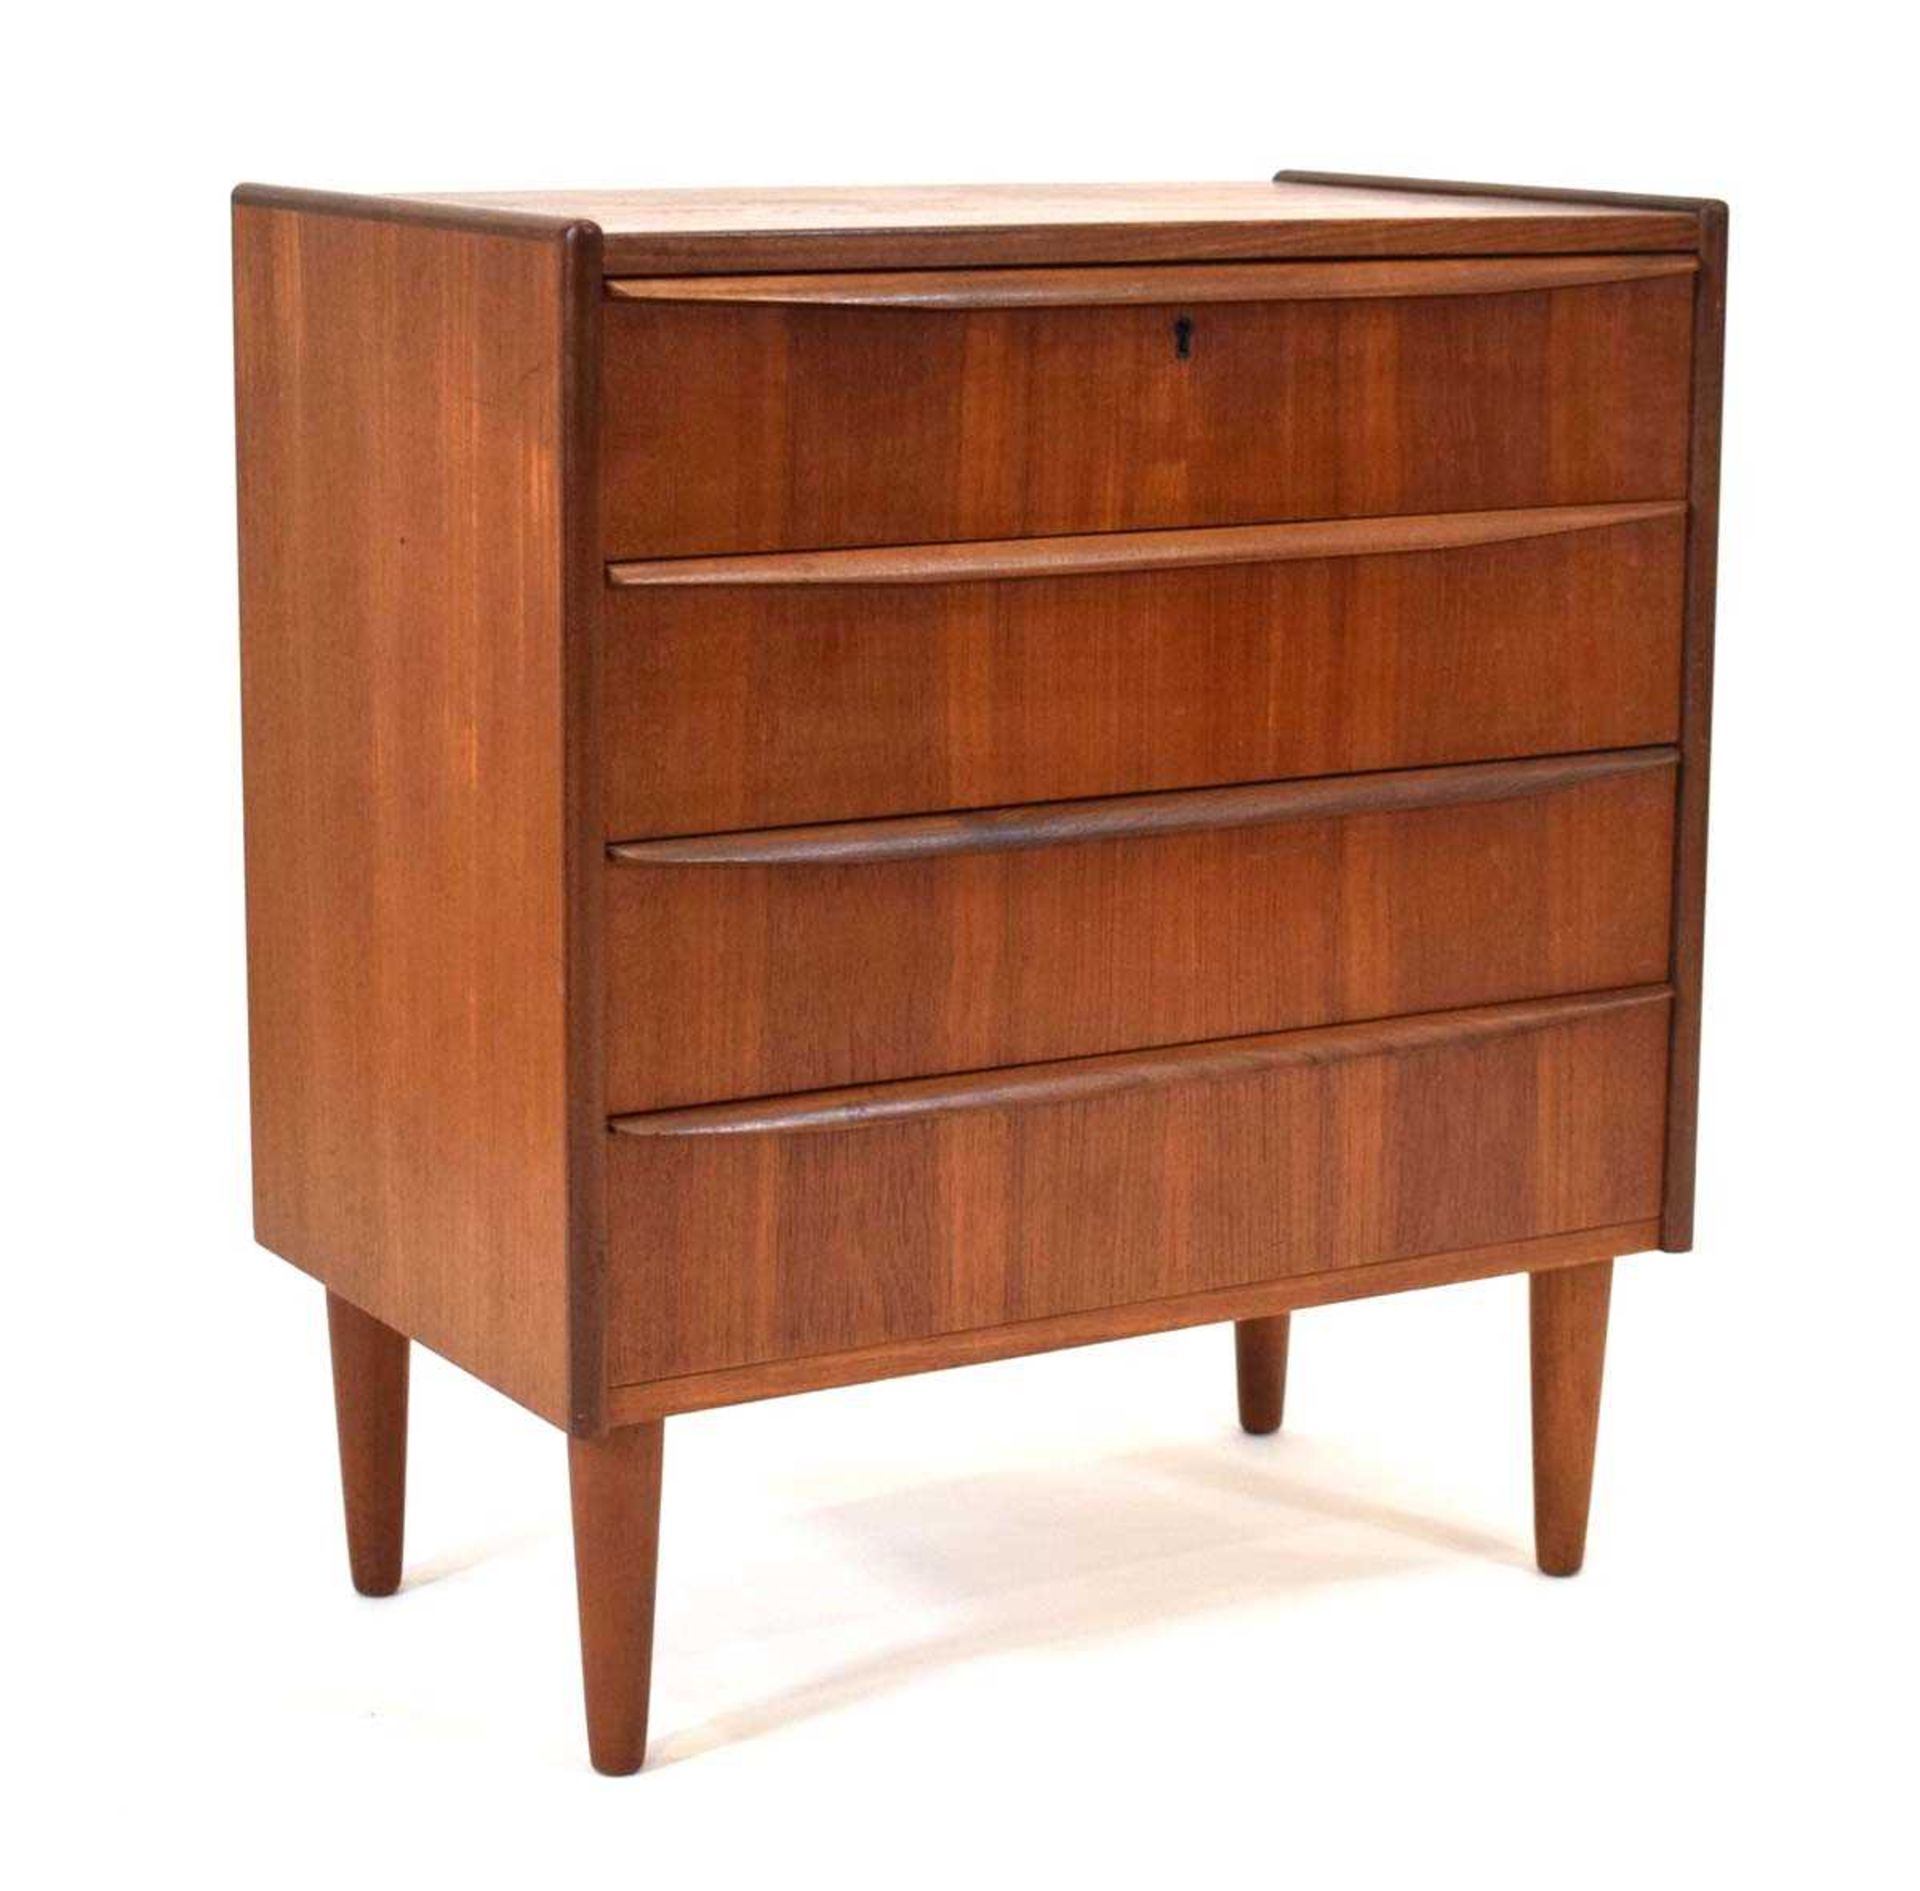 A 1960's Danish teak chest of four drawers with organic handles, on later turned feet, 67 x 41 x